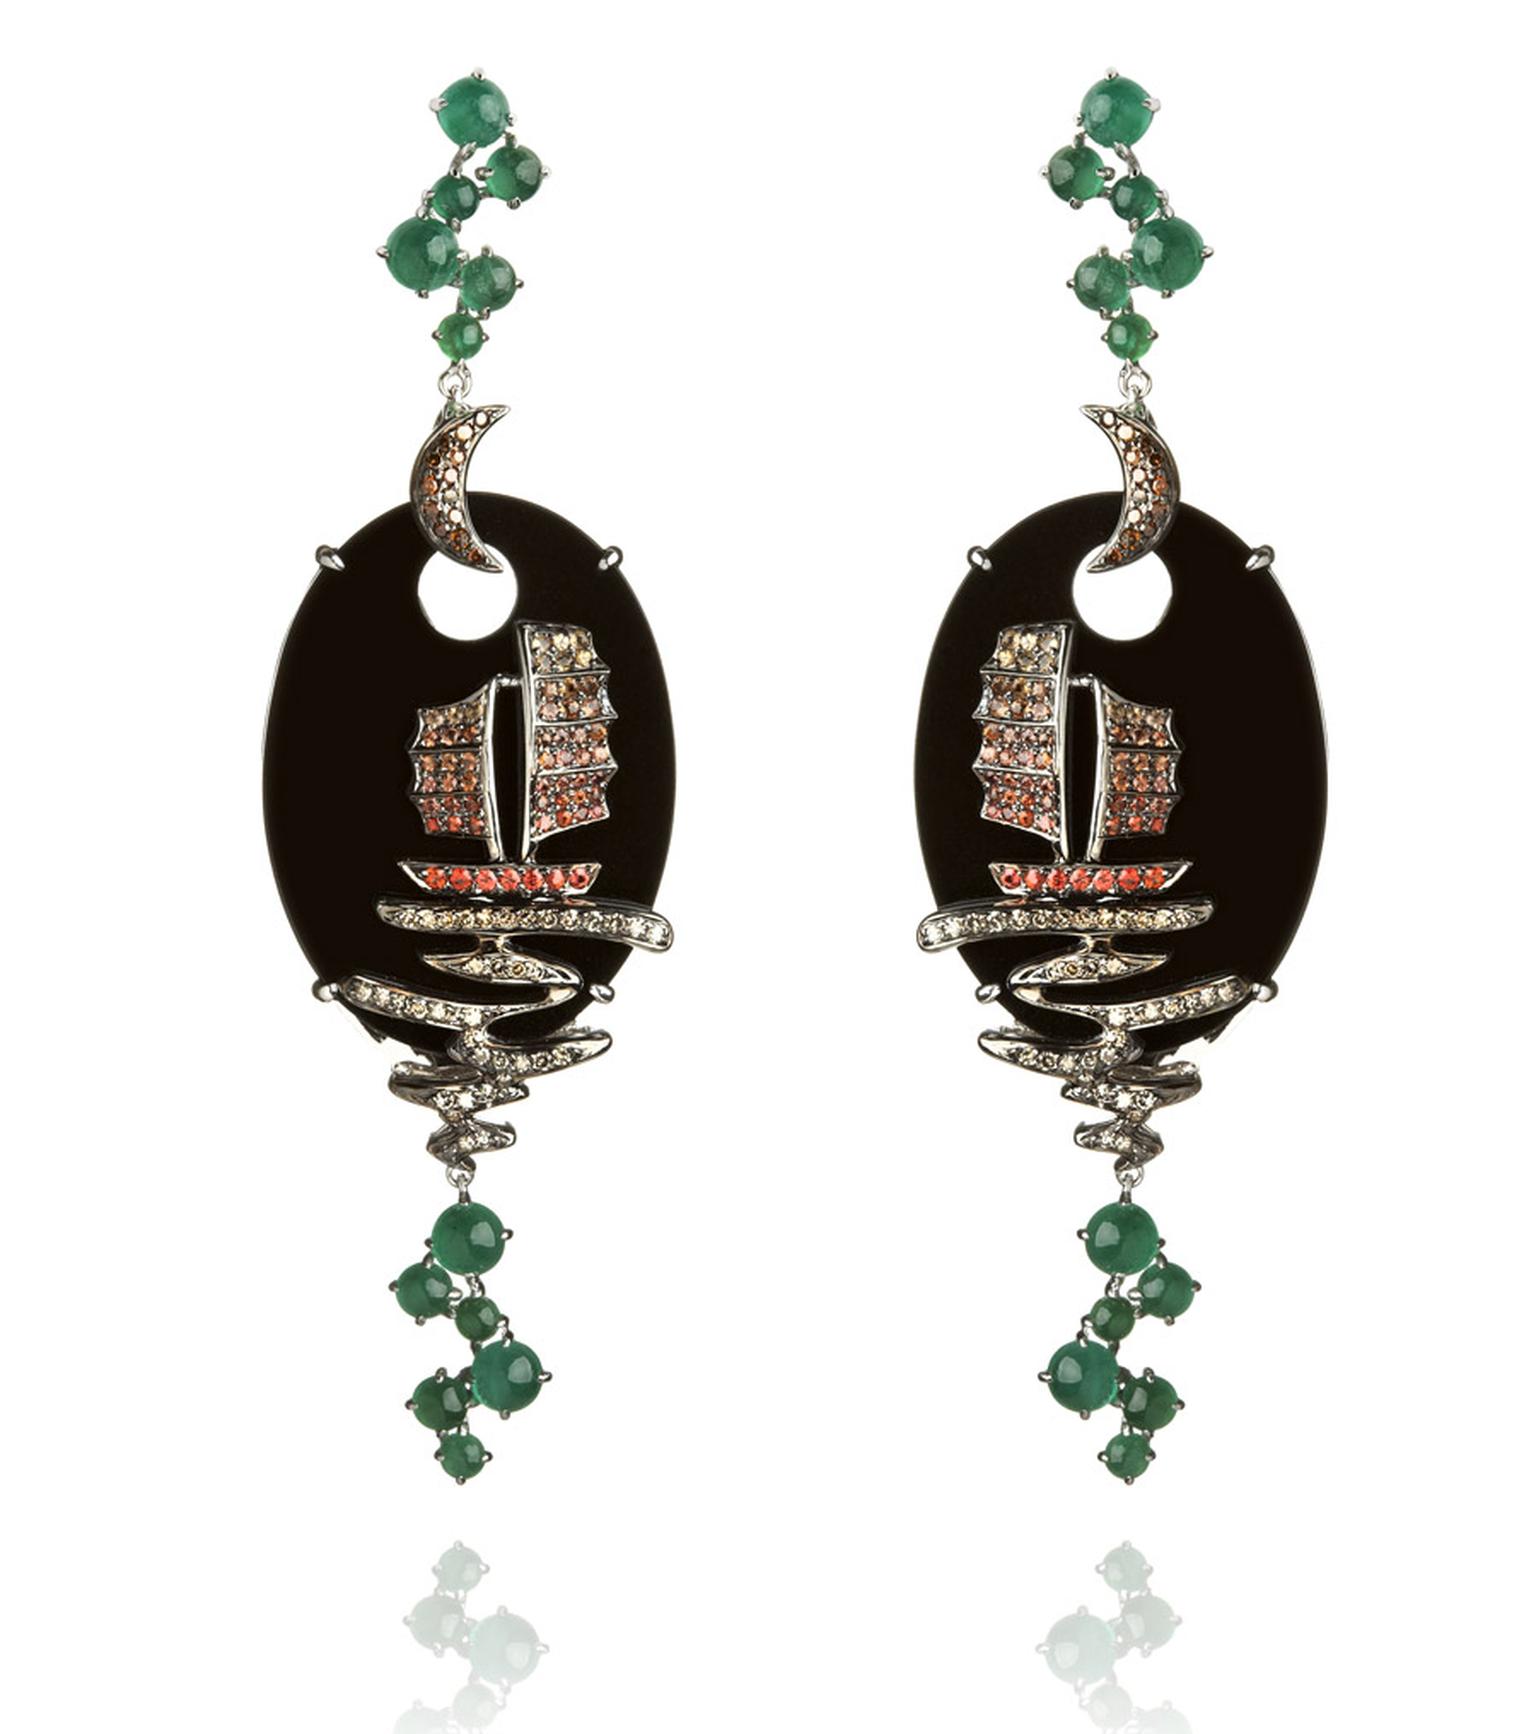 Wendy-Yue-Fantasie-18ct-white-gold--diamond-sapphire-and-emerald-Night-Ship-earrings-By-Wendy-Yue-for--Annnoushka.jpg